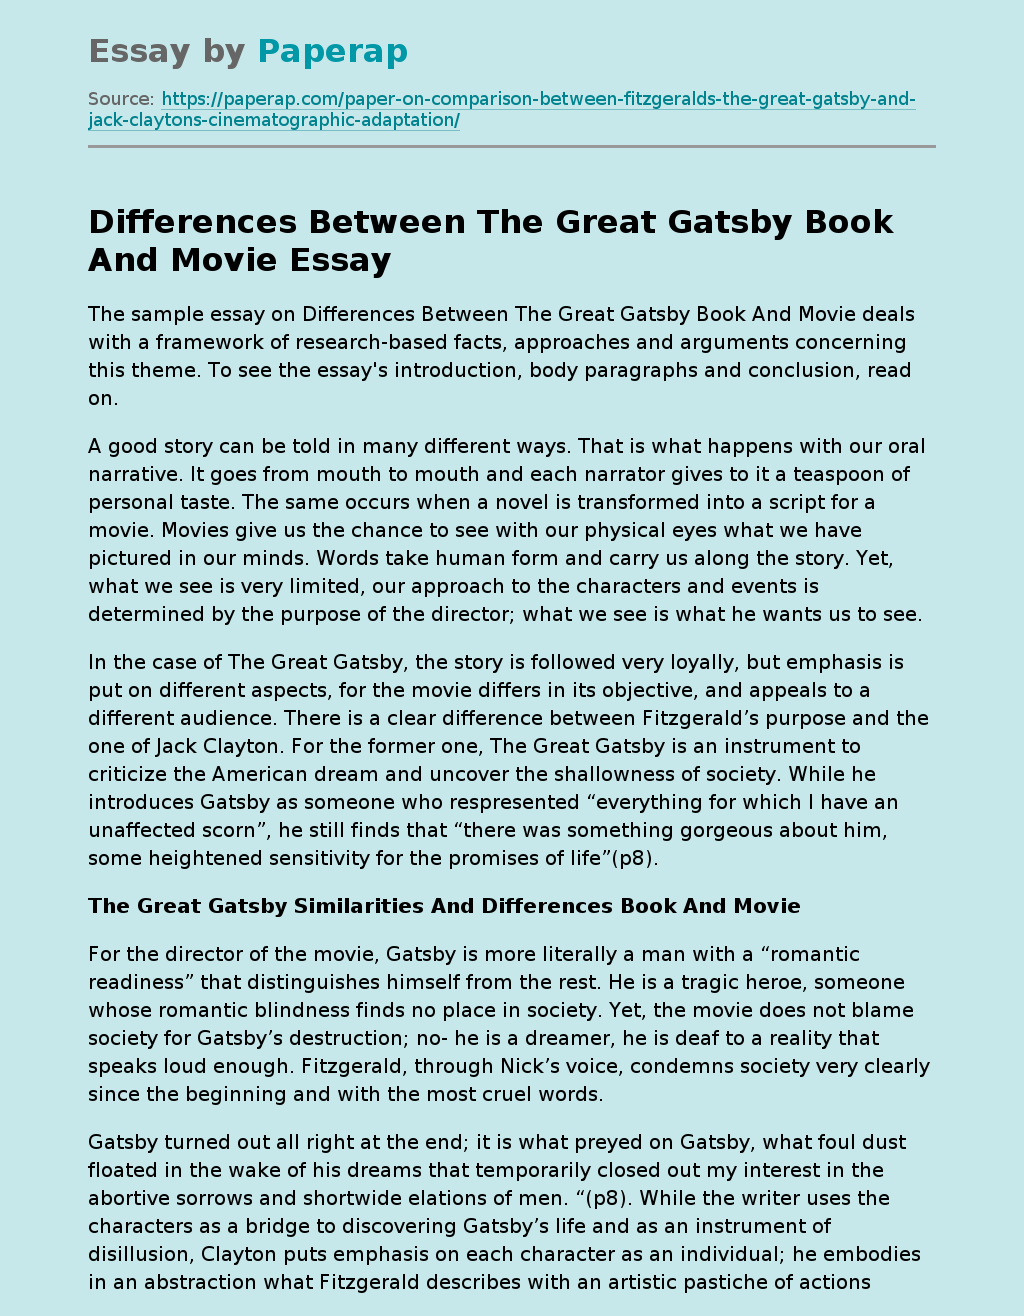 Differences Between The Great Gatsby Book And Movie